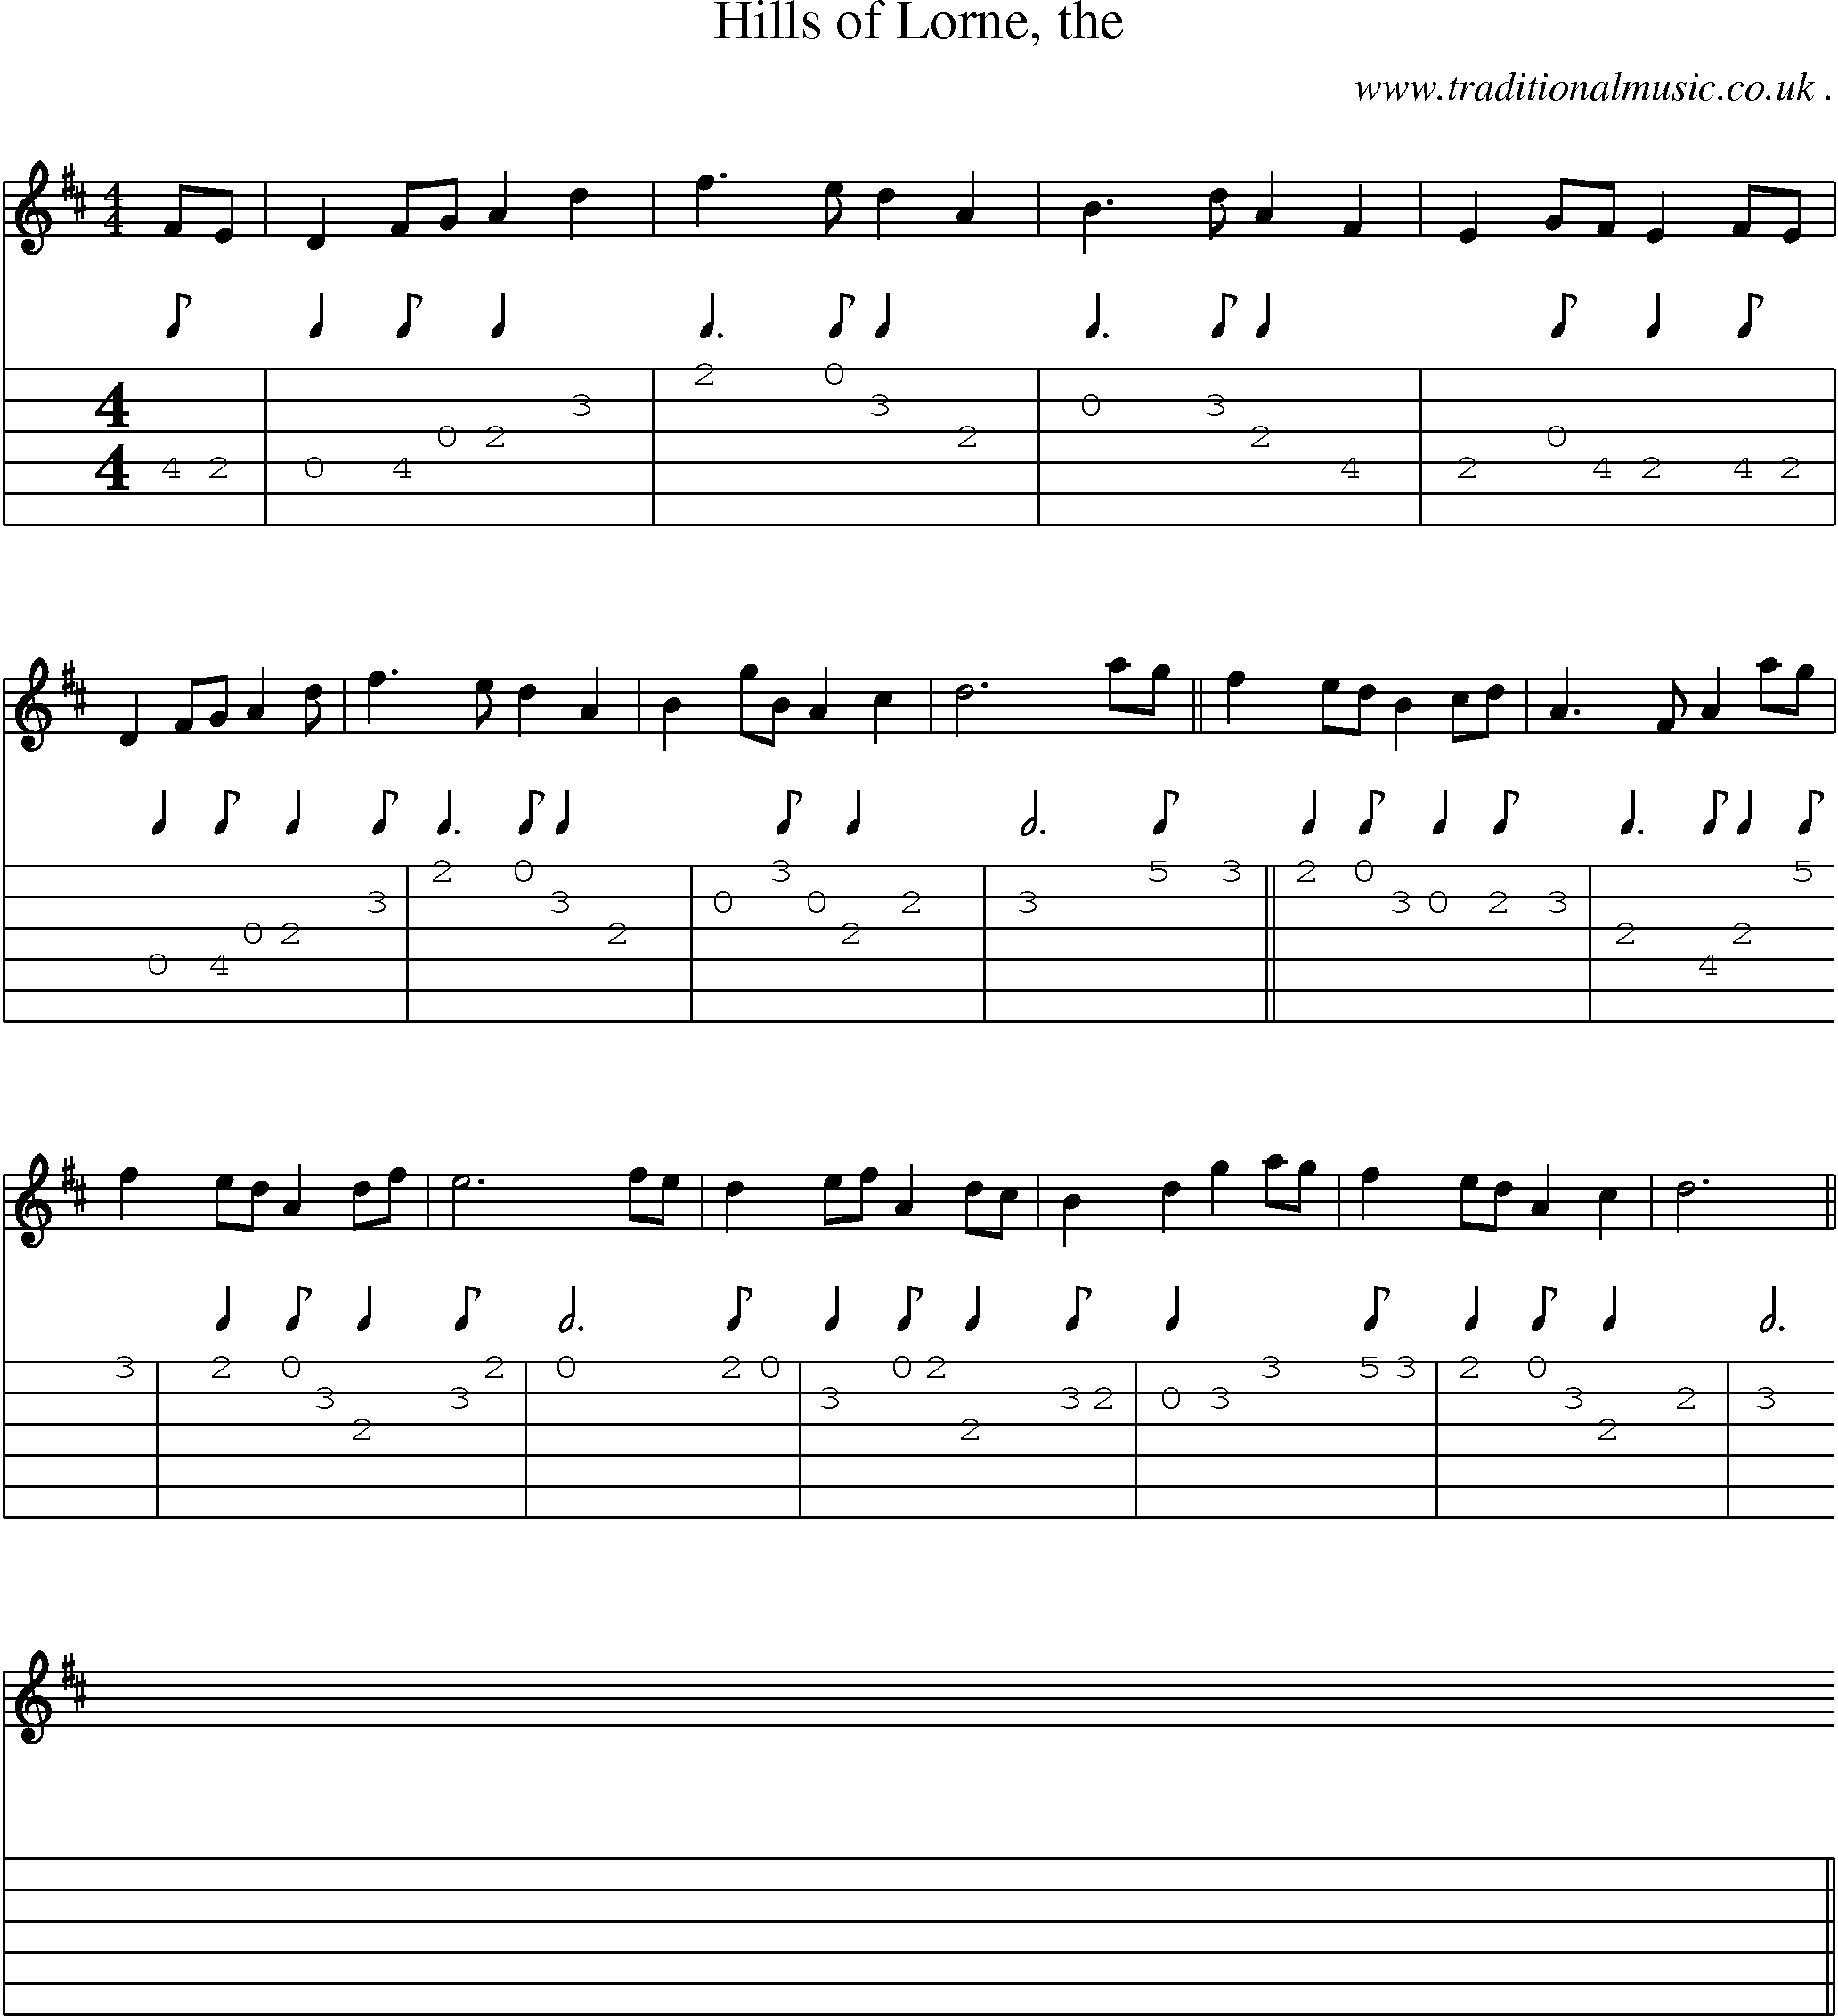 Sheet-music  score, Chords and Guitar Tabs for Hills Of Lorne The